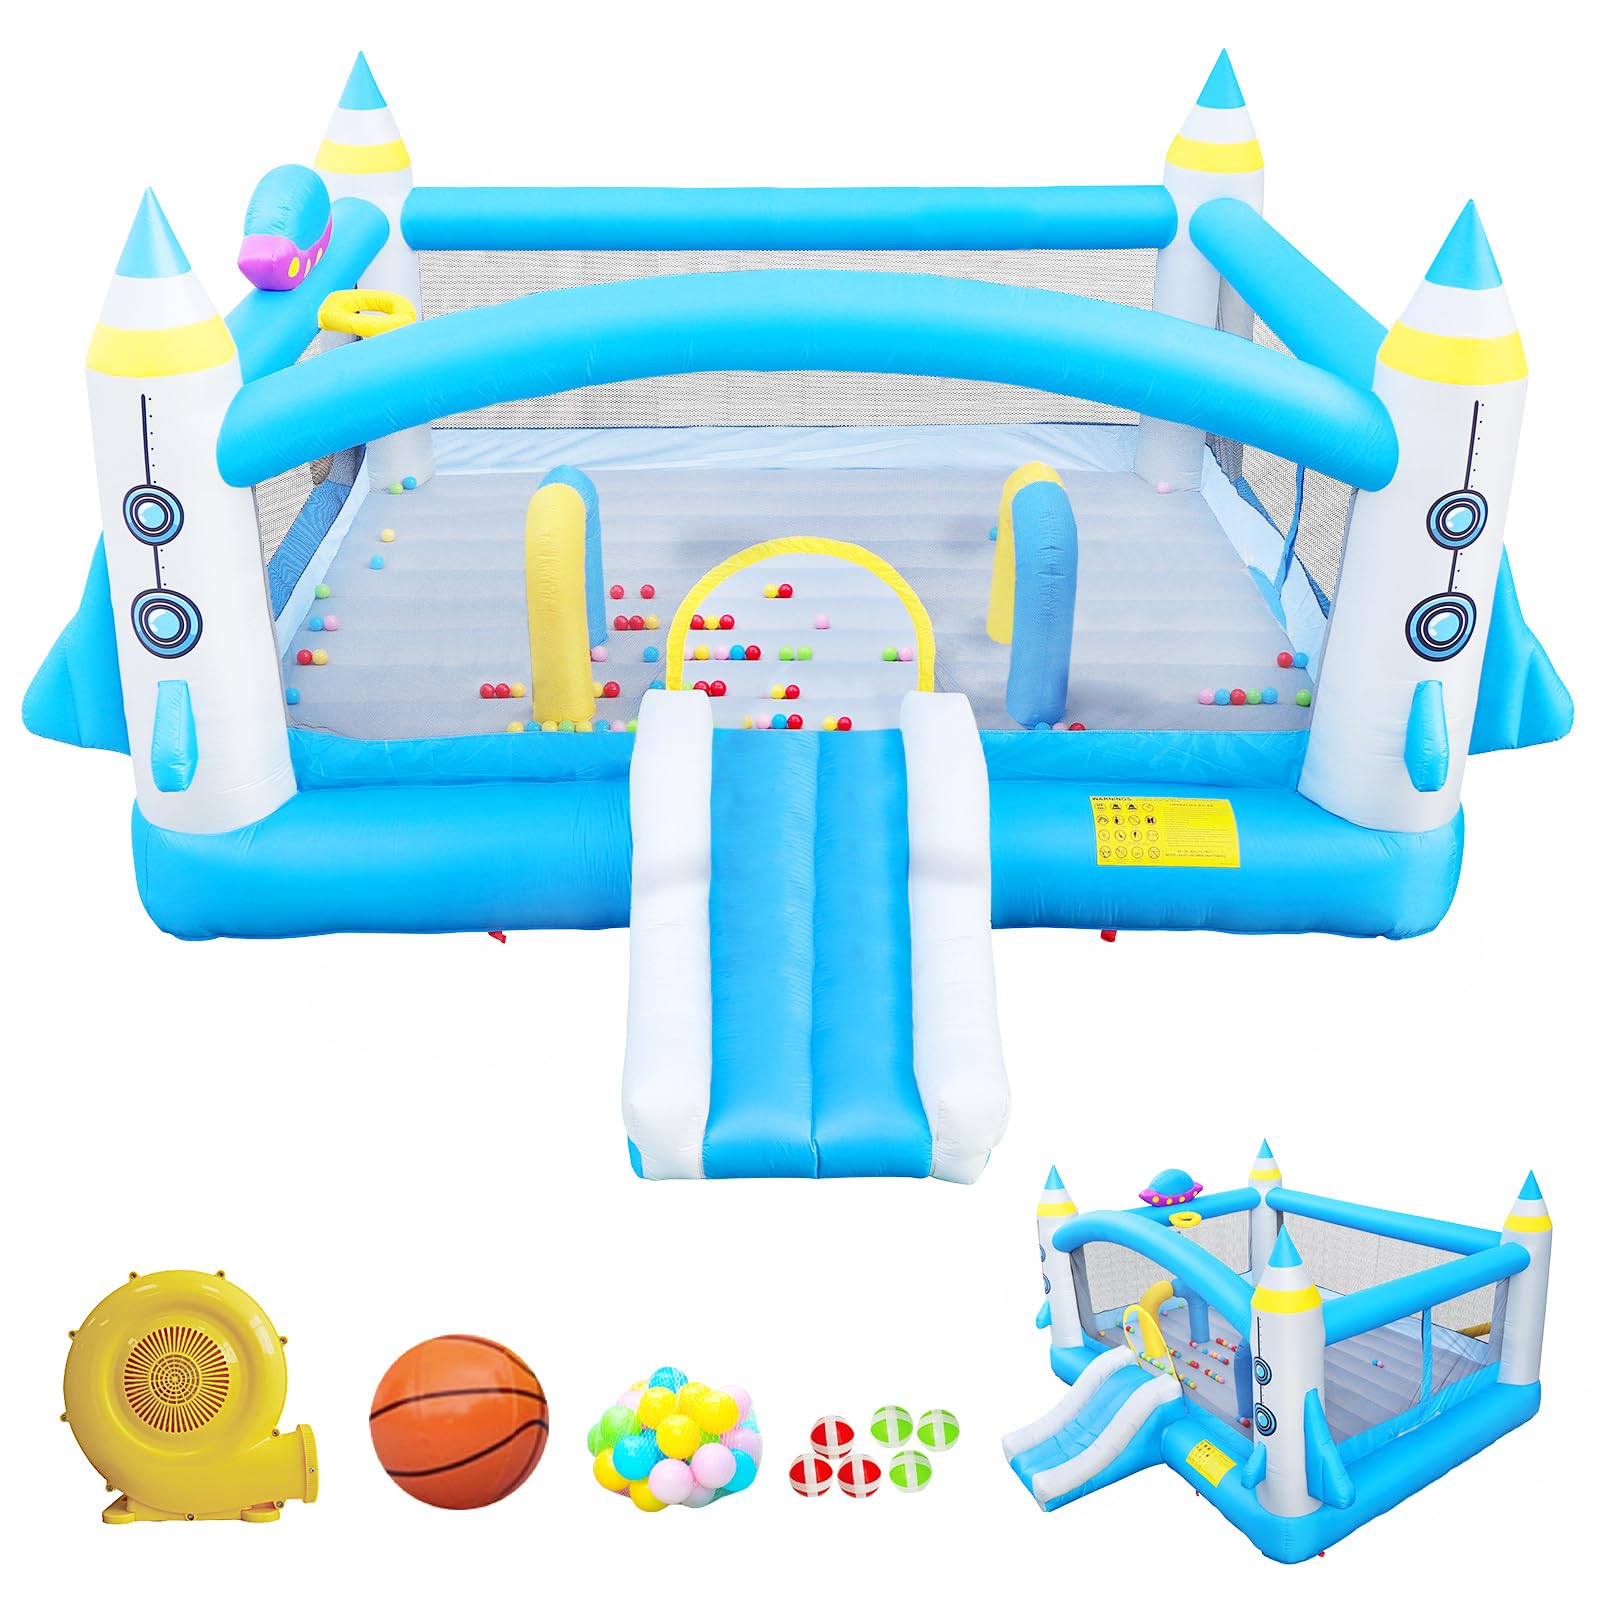 SPOFLYINN Inflatable Bounce House with Balls Accessories Extra Large Jumping Bouncer Play Area for Indoor Outdoor (198 x 180 x 96 Inch) Colorful